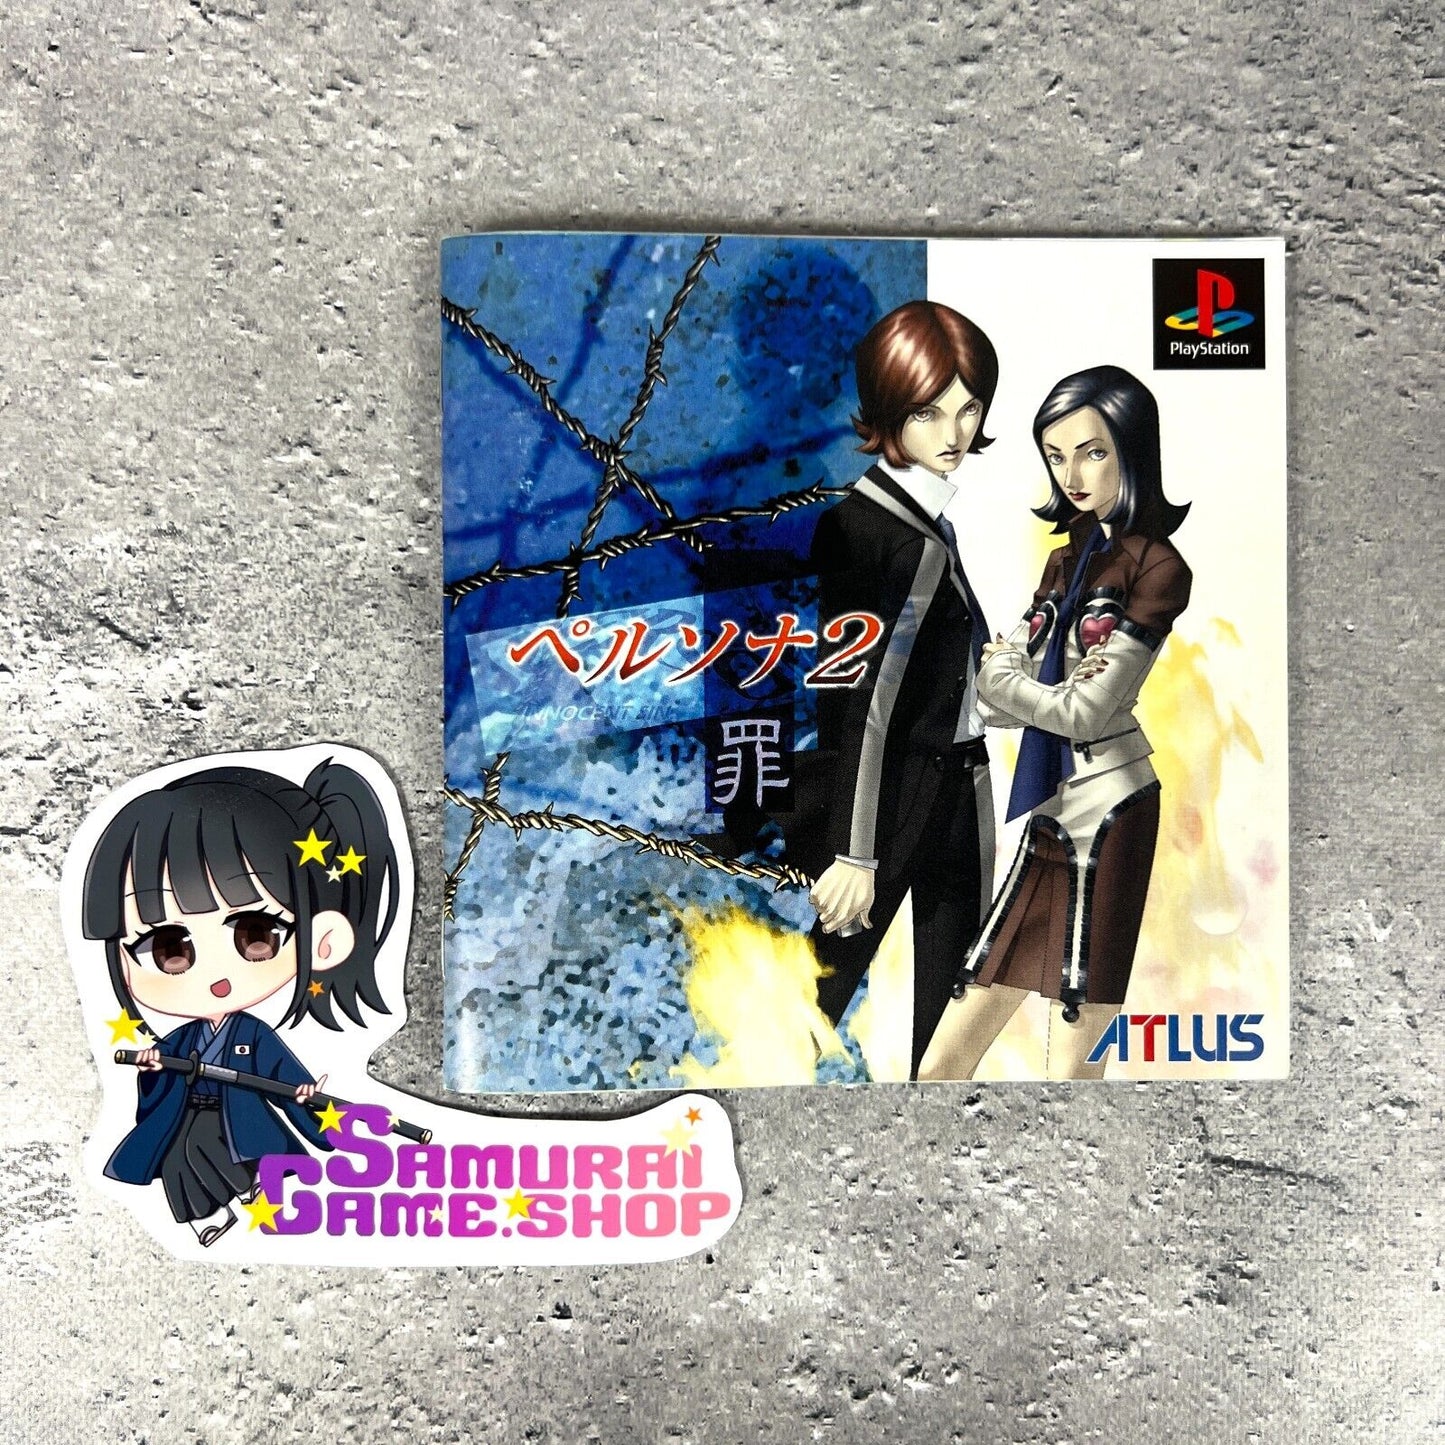 PS1 Persona 2 Innocent Sin ATLUS Japanese Language Vintage Game Play Station 1